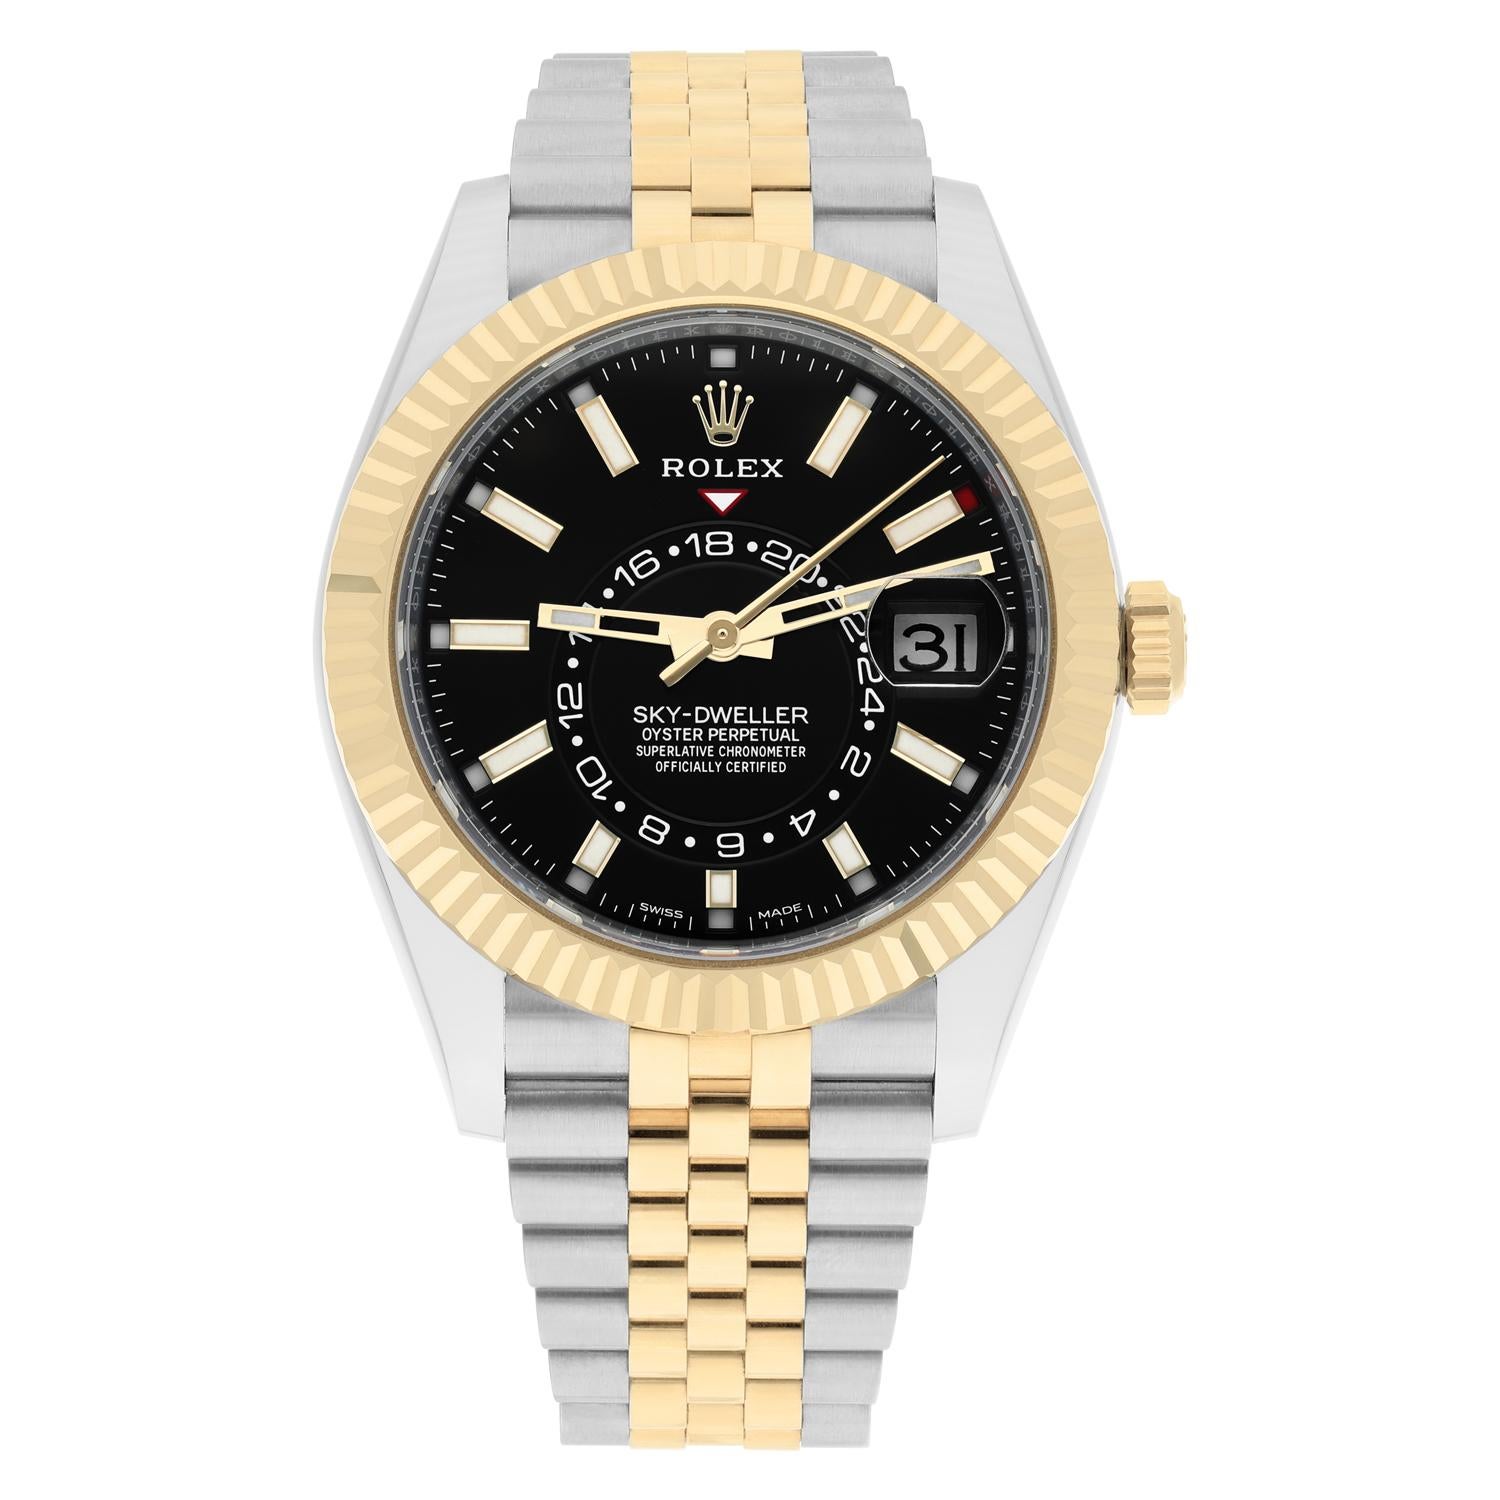 Rolex Sky-Dweller 326933 Stainless Steel/18K Yellow Gold Black Dial Jubilee MINT

Under Rolex international warranty to February 2027!

This 18ct gold & steel 42mm Sky-Dweller with black 'soleil' dial, is the most technically advanced complication